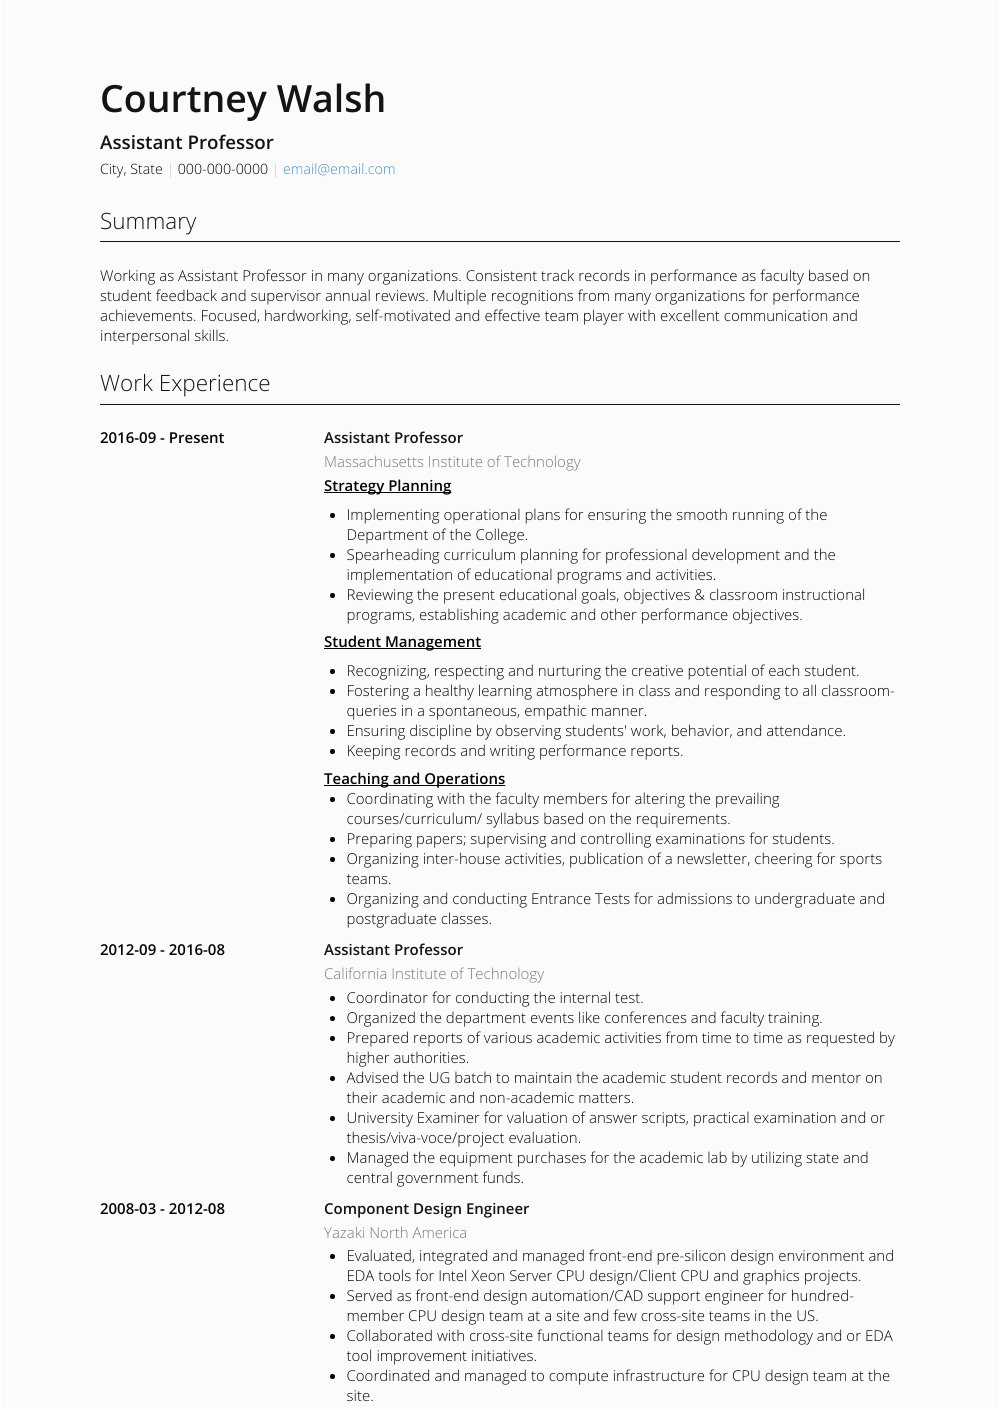 Sample Career Objective for assistant Professor Resume assistant Professor Resume Samples and Templates